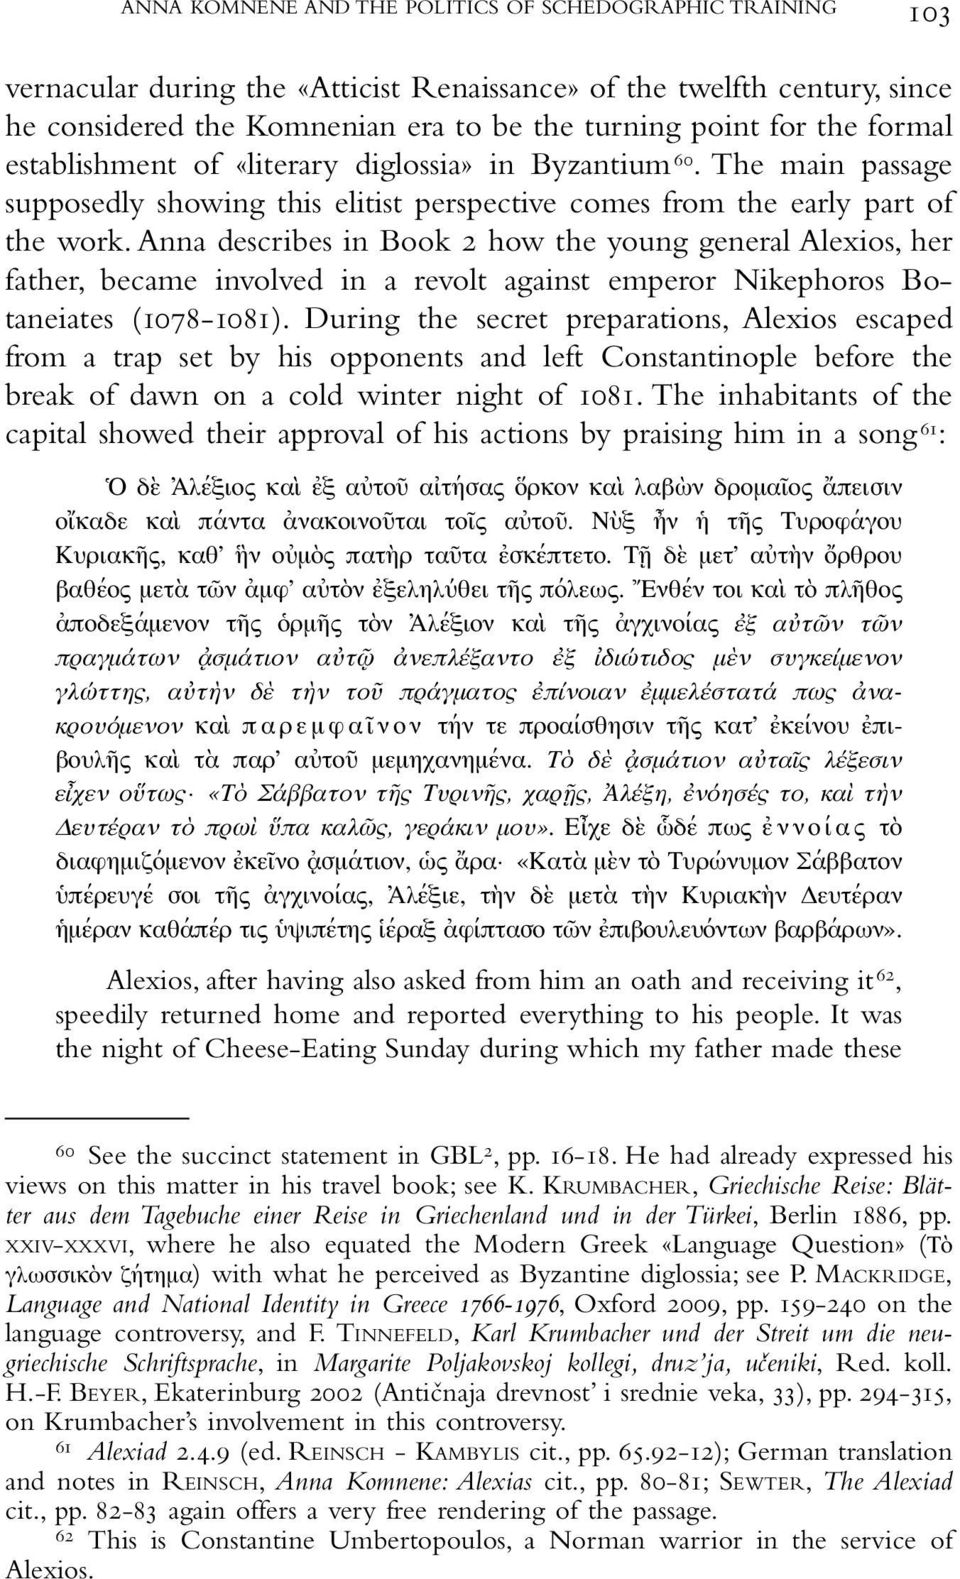 Anna describes in Book 2 how the young general Alexios, her father, became involved in a revolt against emperor Nikephoros Bo - taneiates (1078-1081).